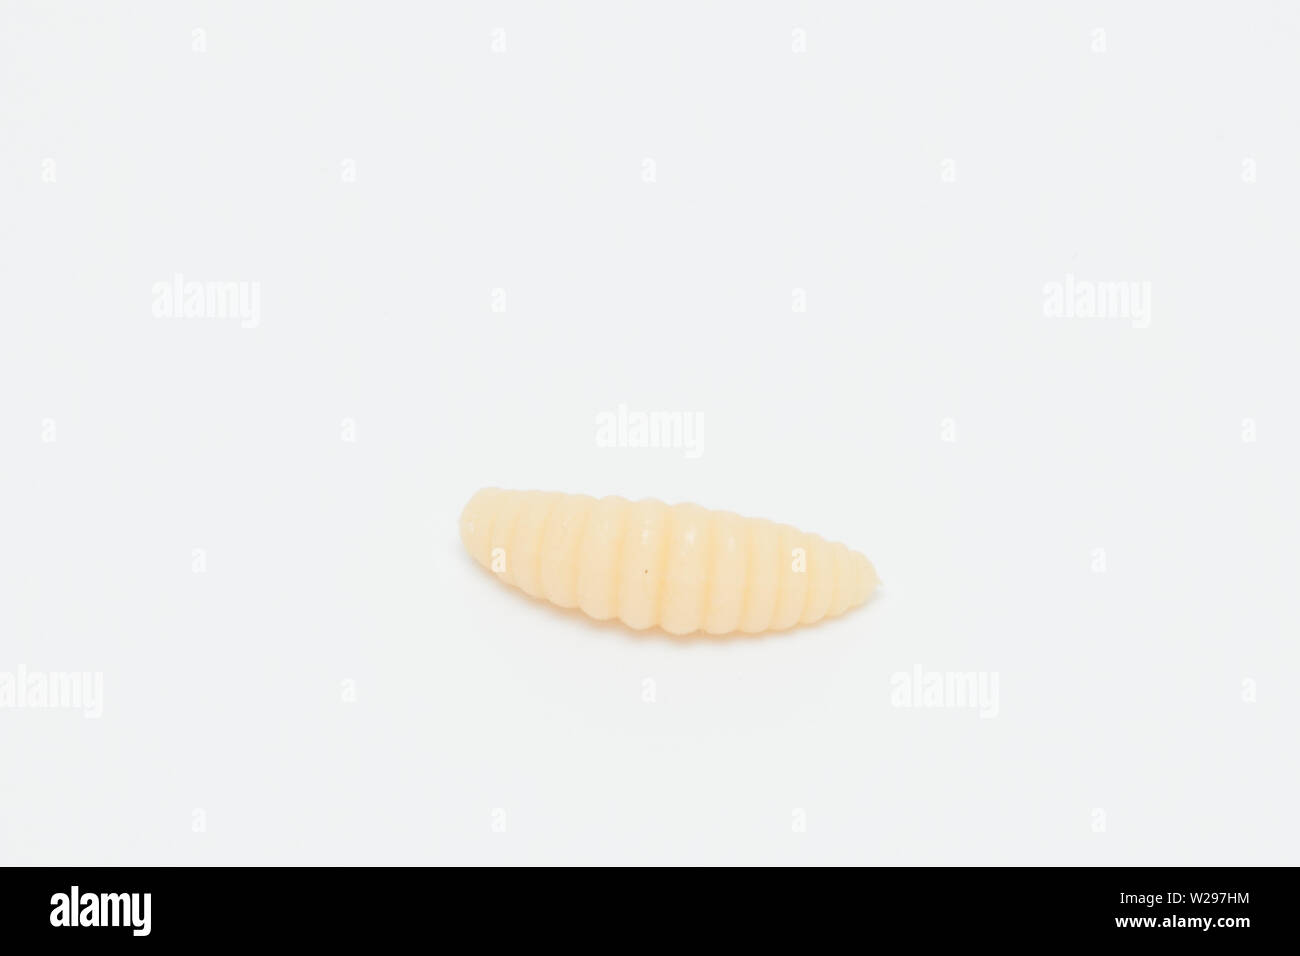 Artificial fishing larvae of insects on white background with soft shadow. Stock Photo